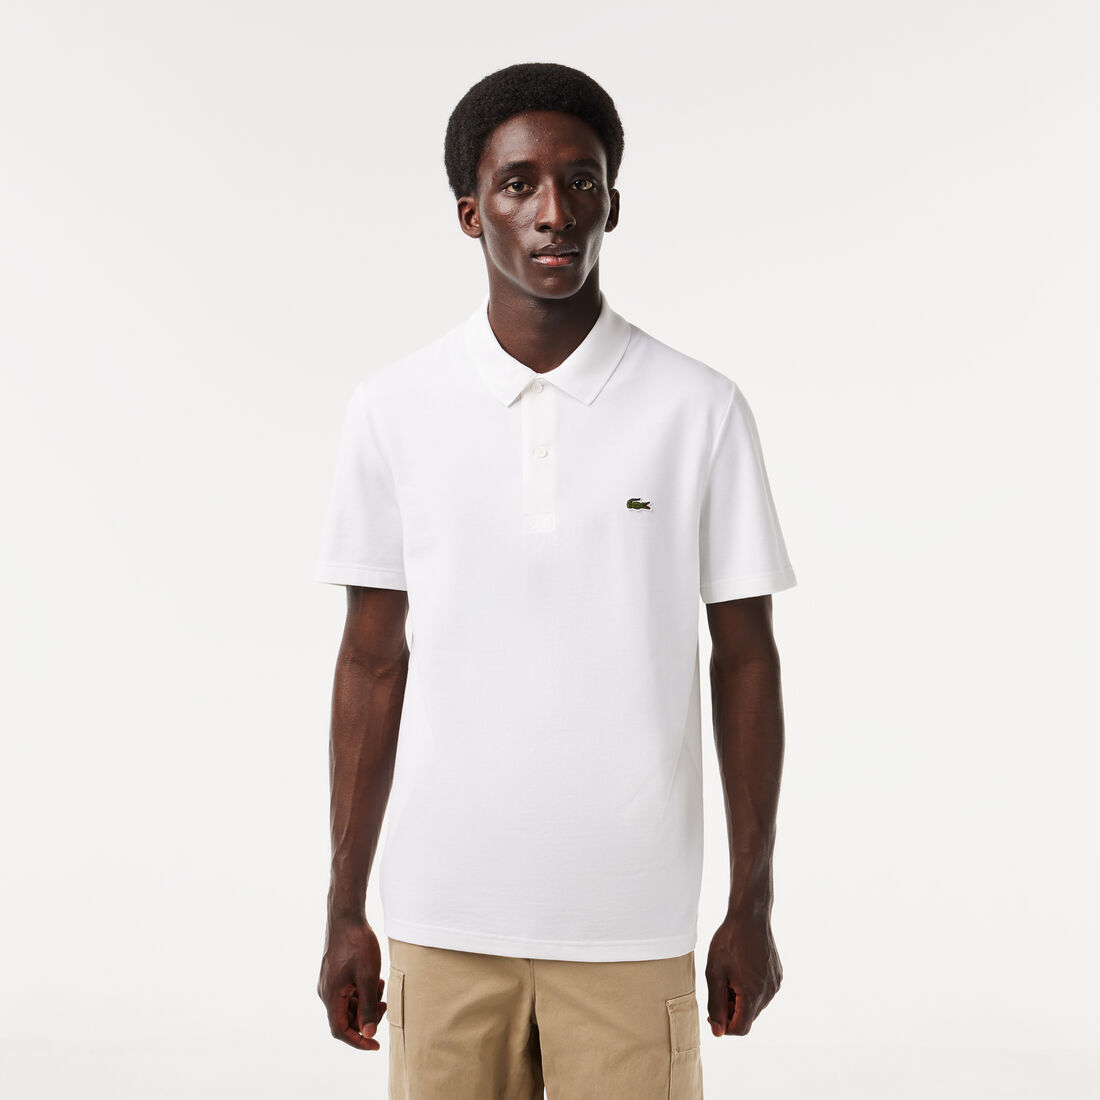 Regular Fit Polyester Cotton Polo Shirt - DH0783-00-001